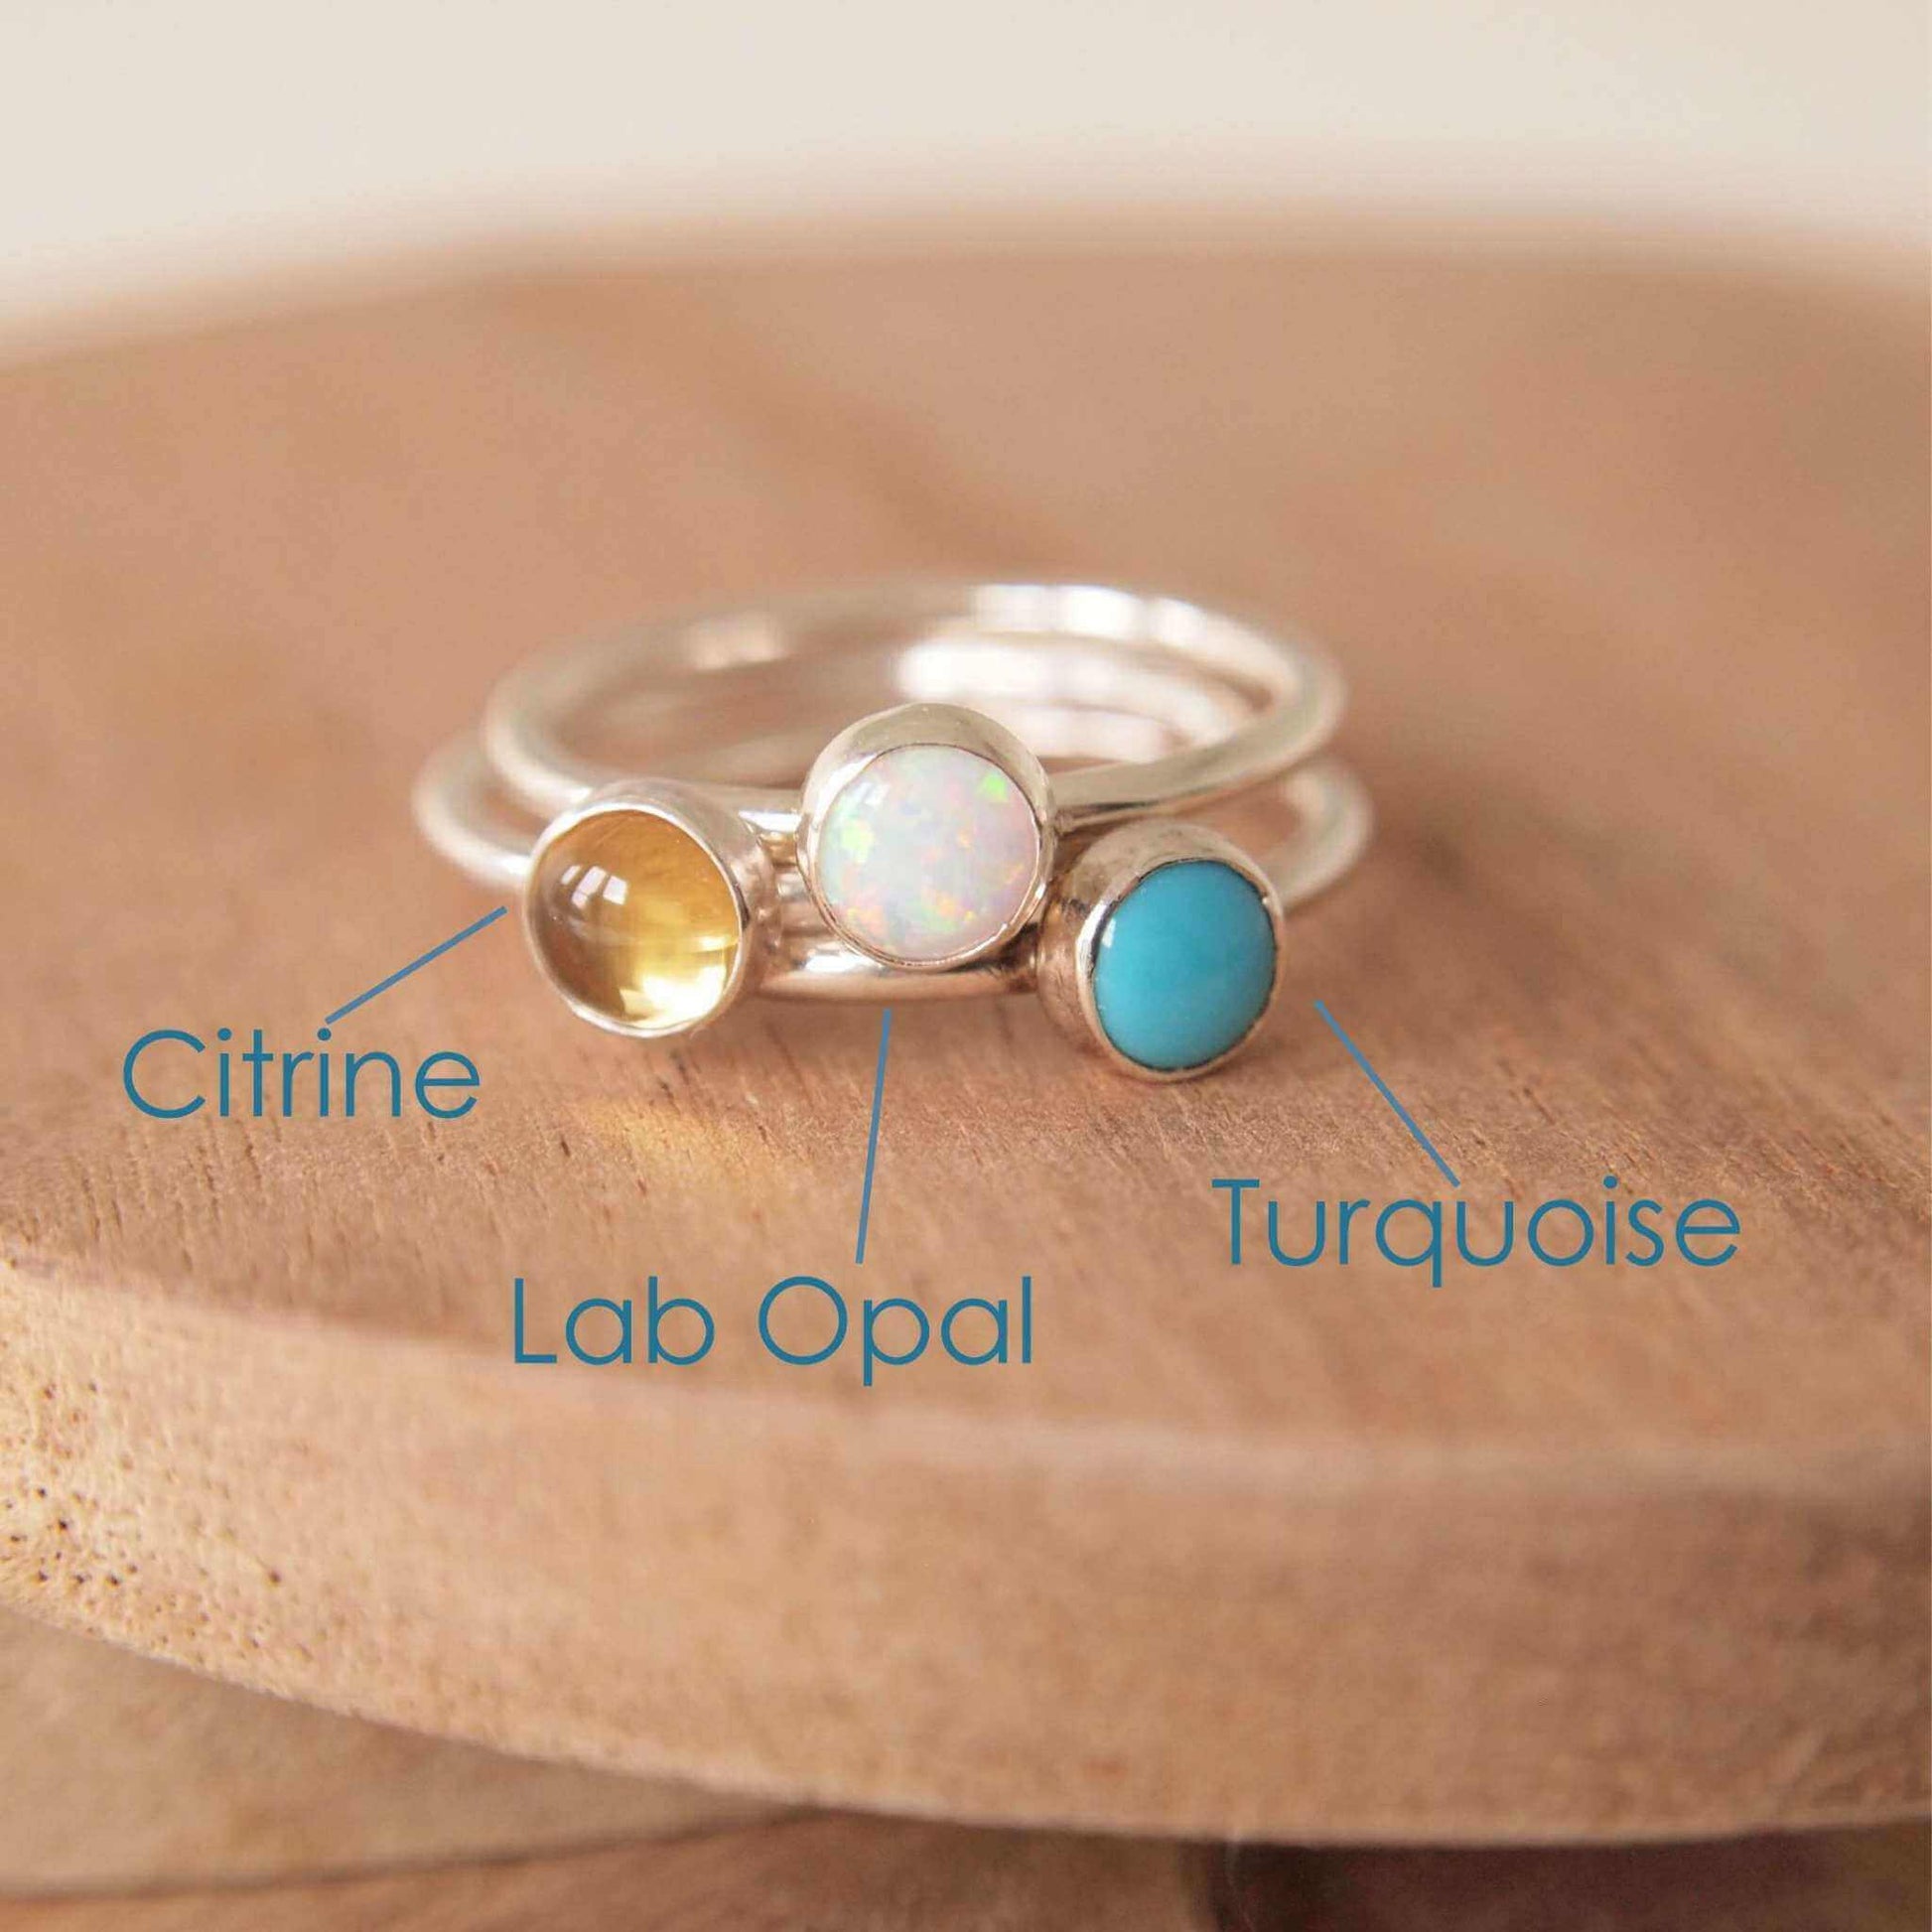 Three Silver rings, each set simply with a single gemstone in Lab Opal, Citrine and Turquoise in a round 3mm size. Birthstones for October, November and December. Handmade by Maram Jewellery in Edinburgh